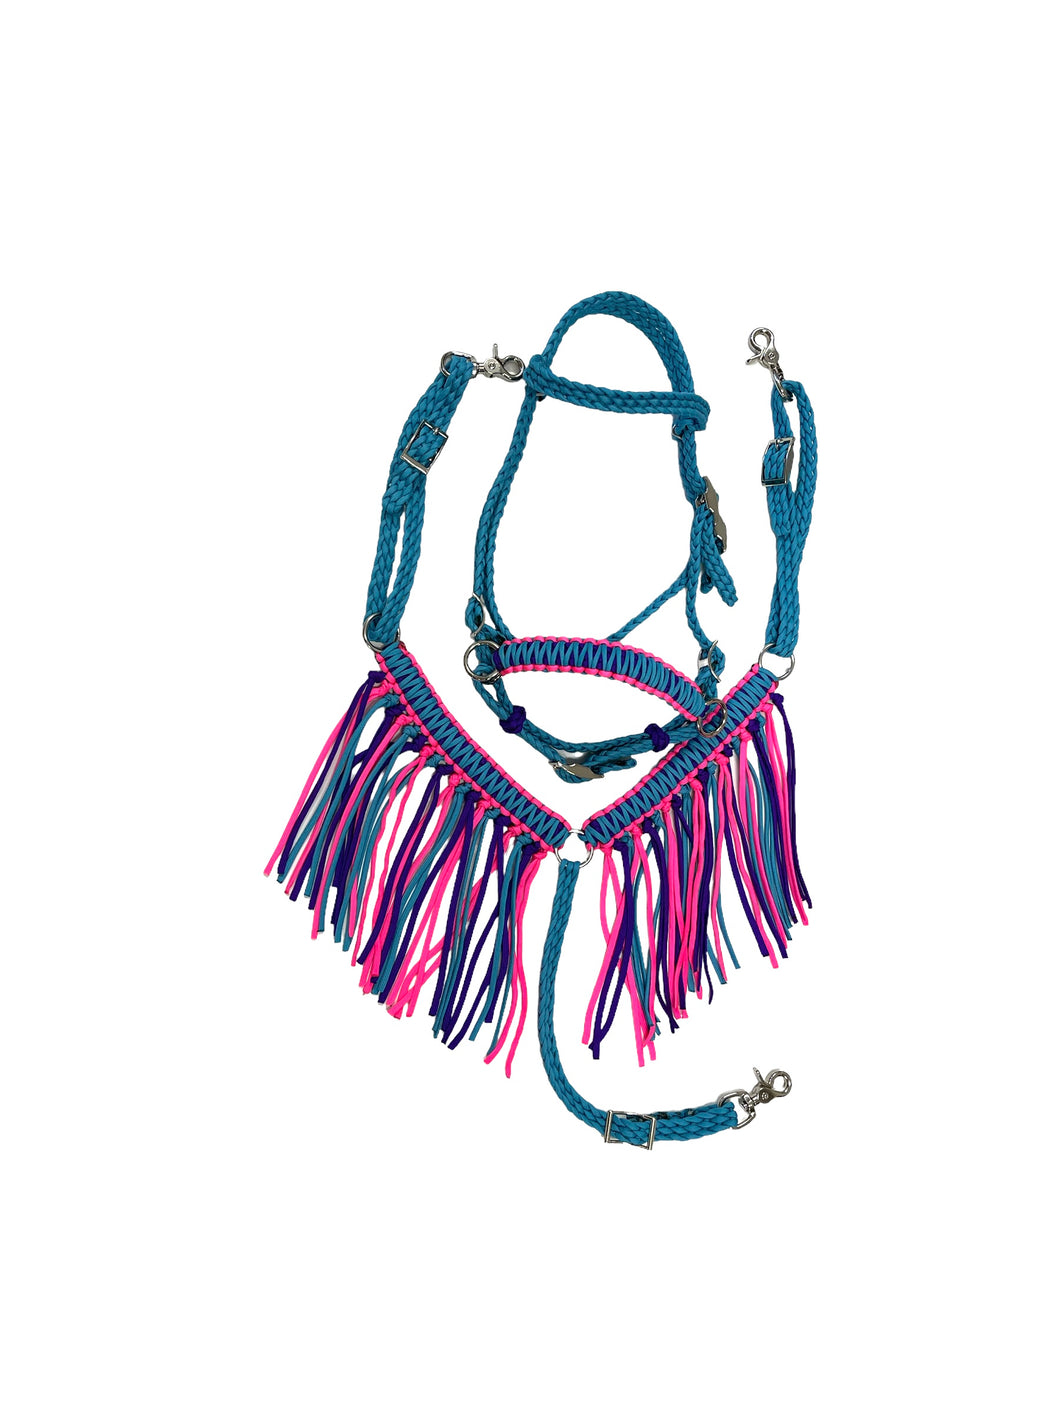 Pony Set- Purple, pink, and neon turquoise with Bitless Bridle